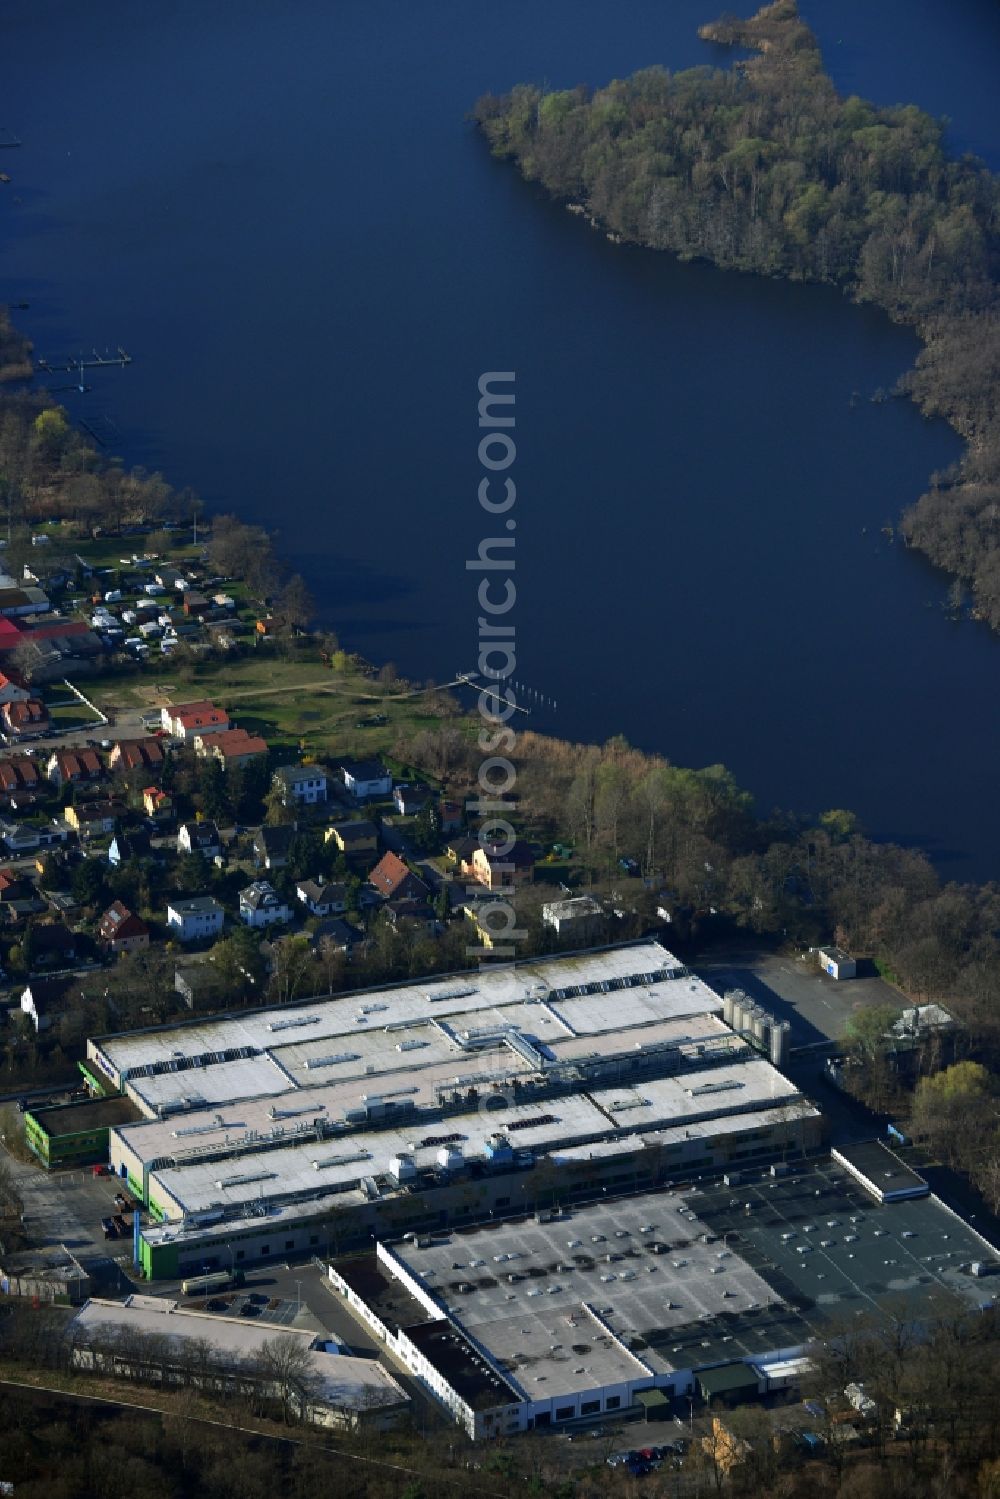 Berlin OT Heiligensee from the bird's eye view: View of the Tetra Pak Produktions GmbH & Co. KG and the Underberg GmbH in the district of Heiligensee in Berlin